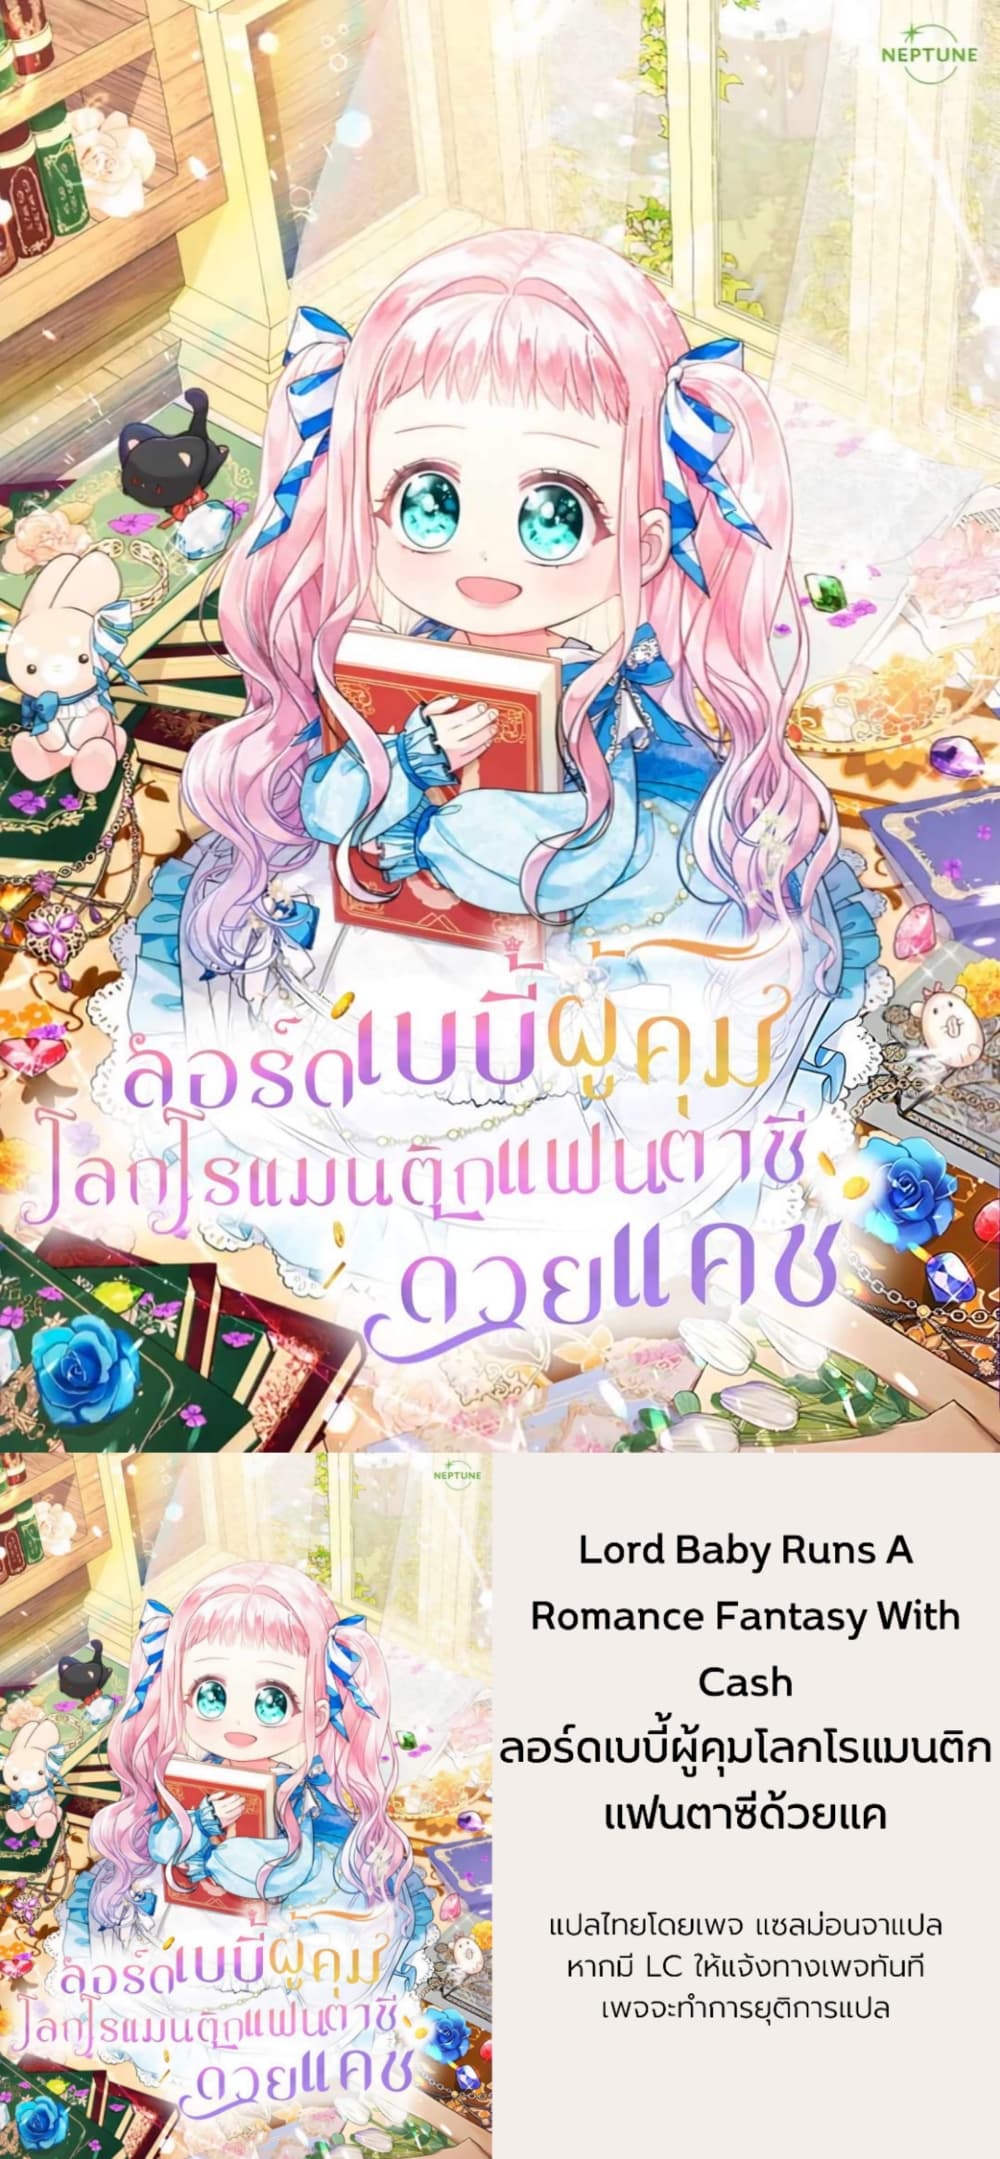 Lord Baby Runs a Romance Fantasy With Cash 1-1